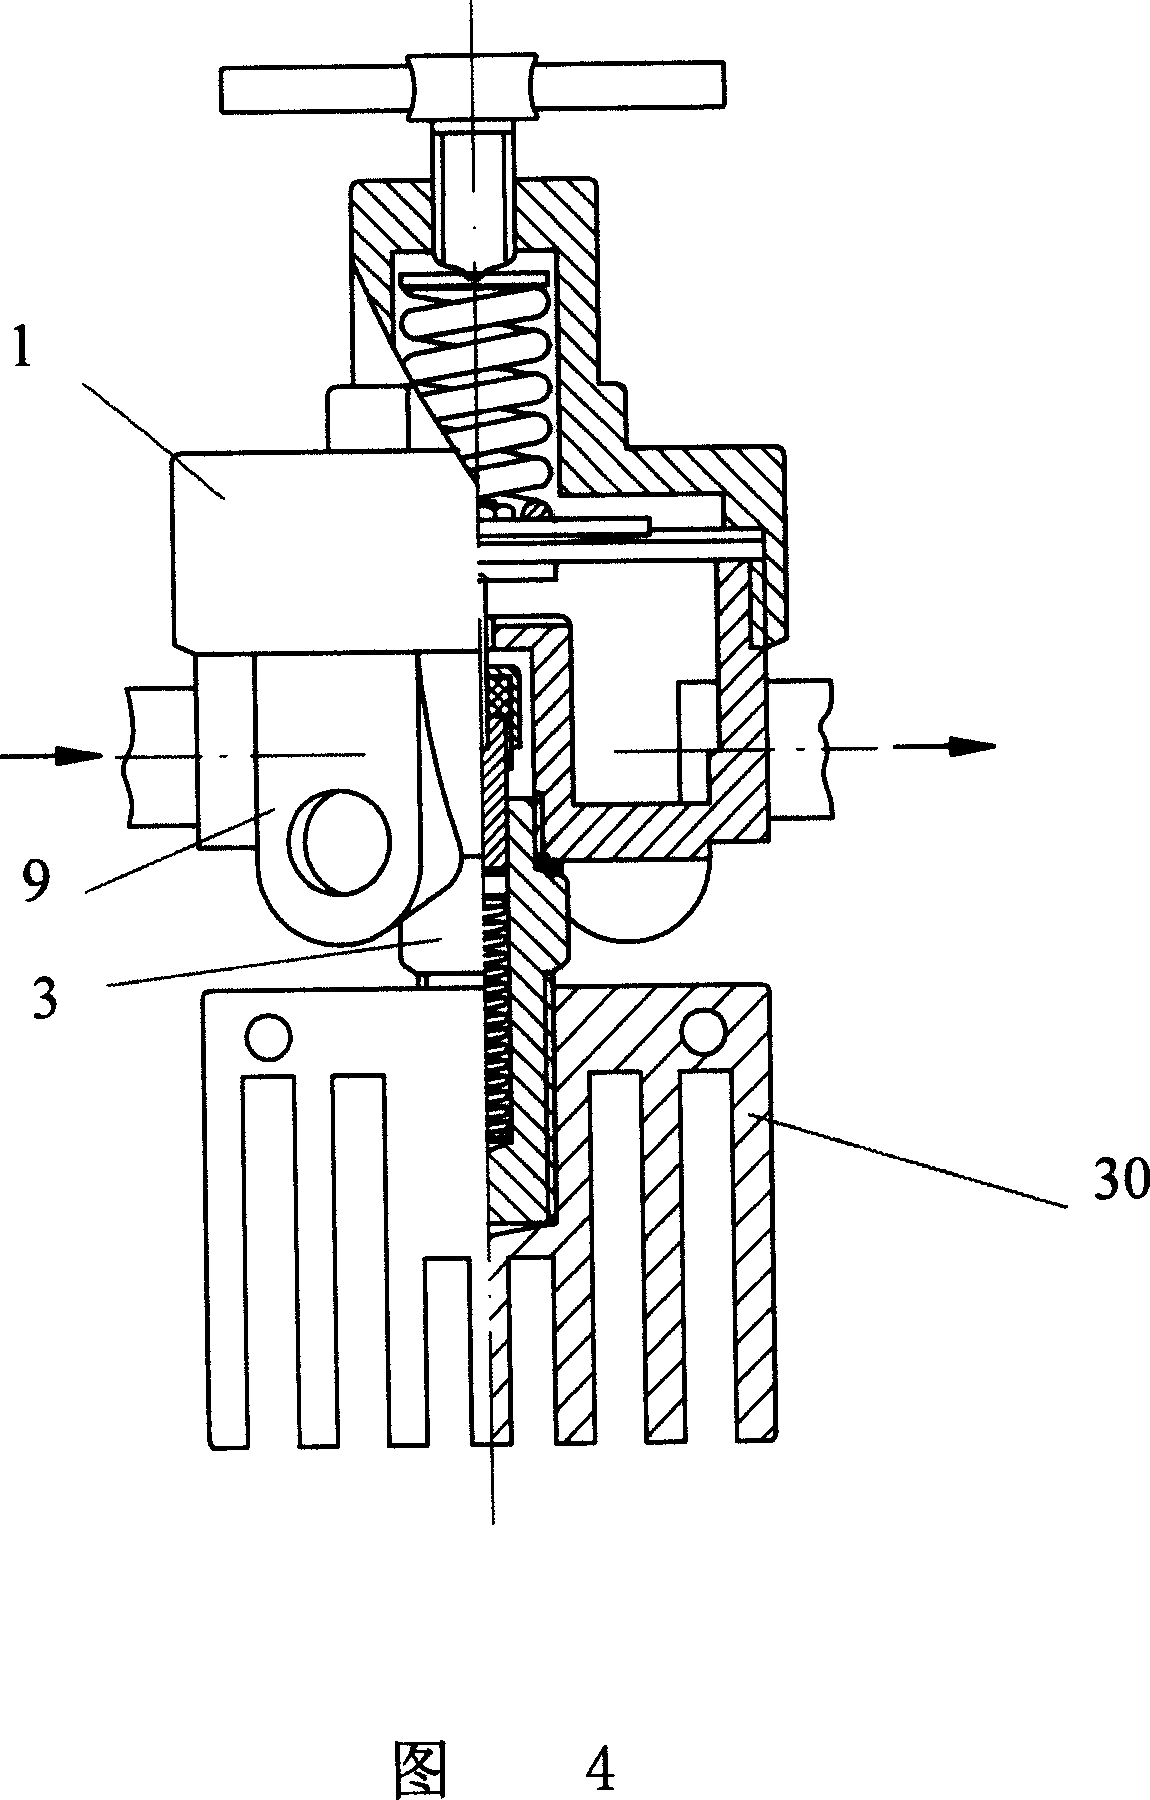 Anti-freezing pressure reducing device for natural gas